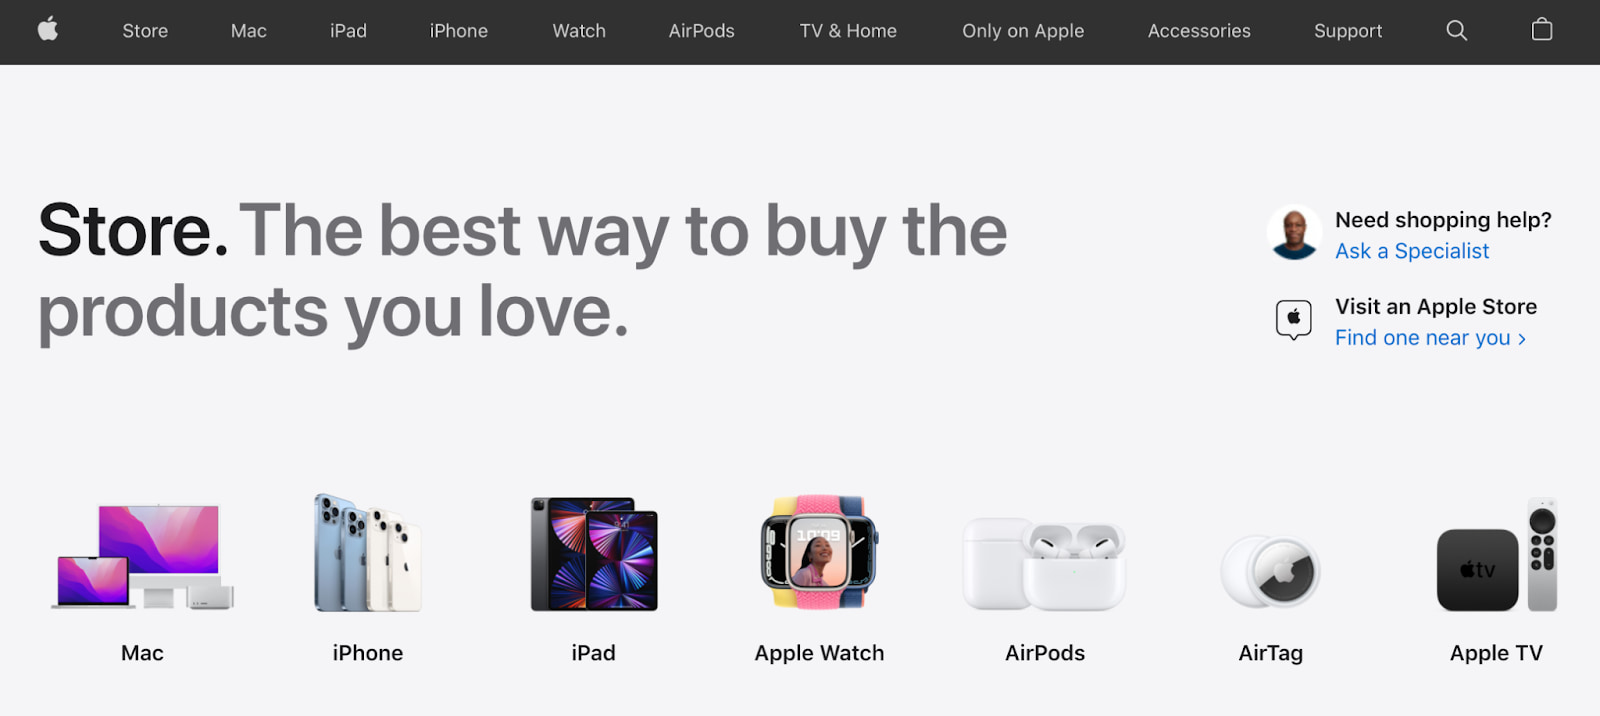 Apple's omni-channel experience